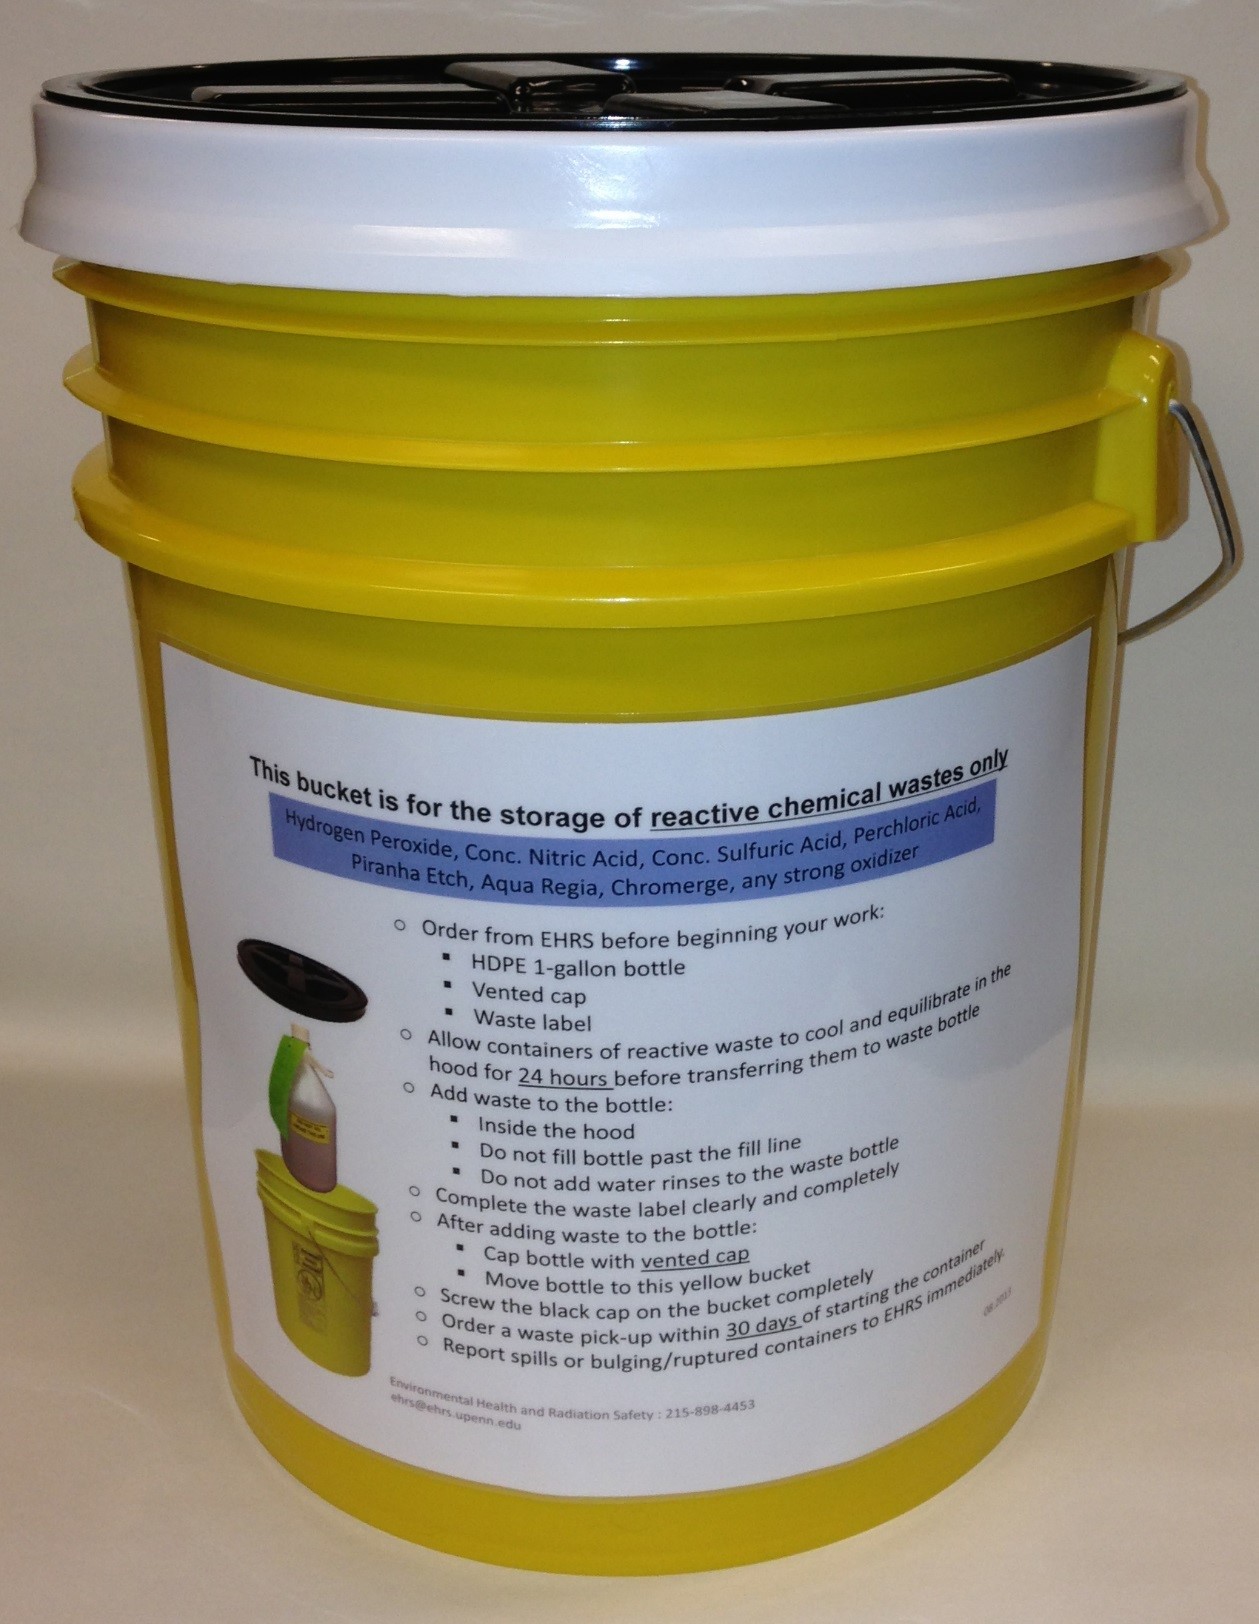 Yellow 5-gallon plastic bucket with black screw top lid and instructions sign affixed to side